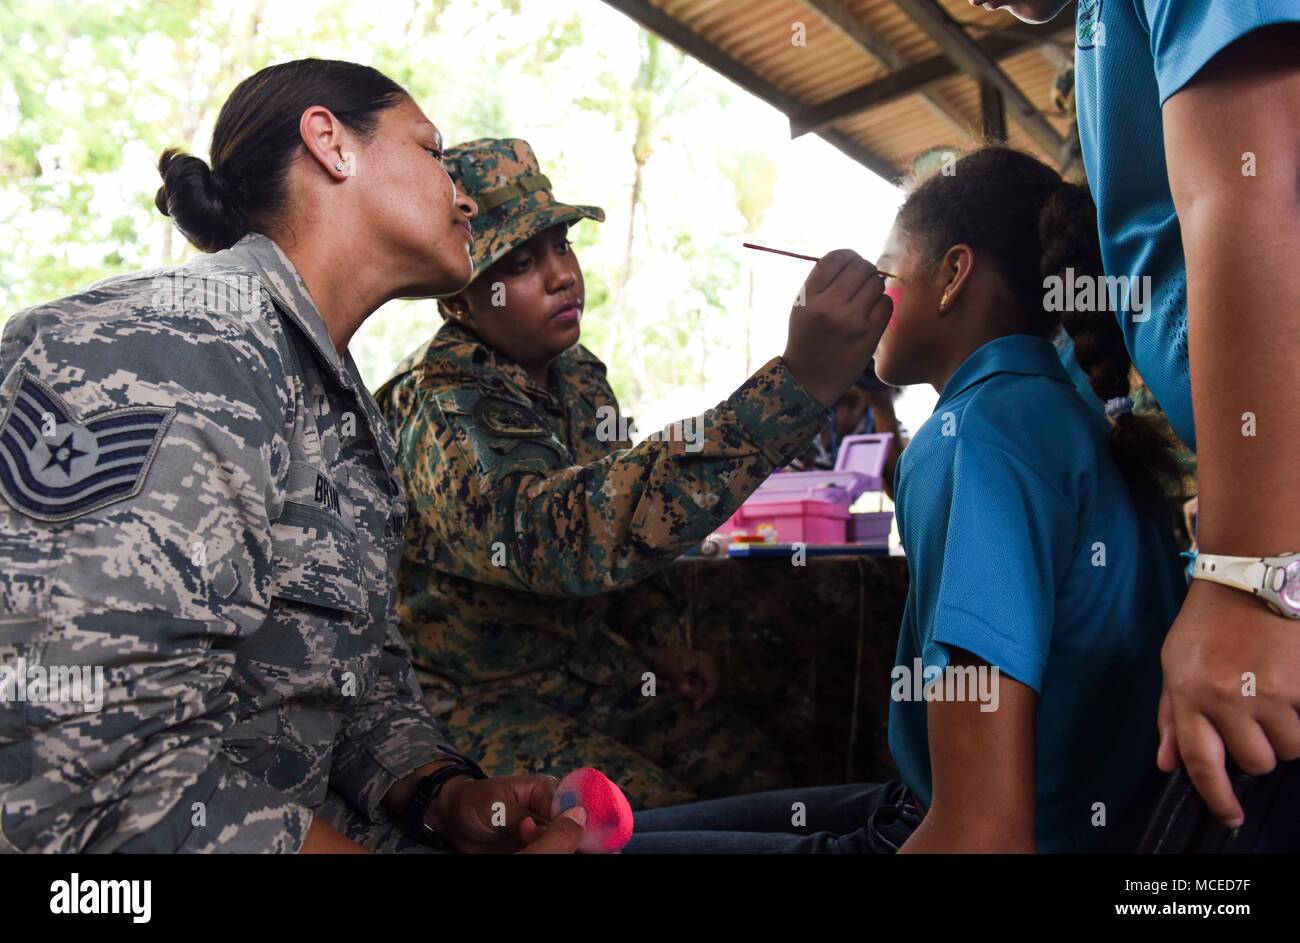 U.S. Air Force Tech. Sgt. Claudia Bryant, 346th Air Expeditionary Group security forces member, deployed from Tucson, Arizona, paints the face of a guest during the opening ceremony of Exercise New Horizons 2018, April 11, 2018 in Meteti, Panama. Exercise New Horizons is a joint training exercise where all branches of the U.S. military conduct training in civil engineer, medical and support services while benefiting the local community. During the exercise, U.S. military members will build three schools, one community center and a women’s health ward in the Meteti area. They will also work clo Stock Photo